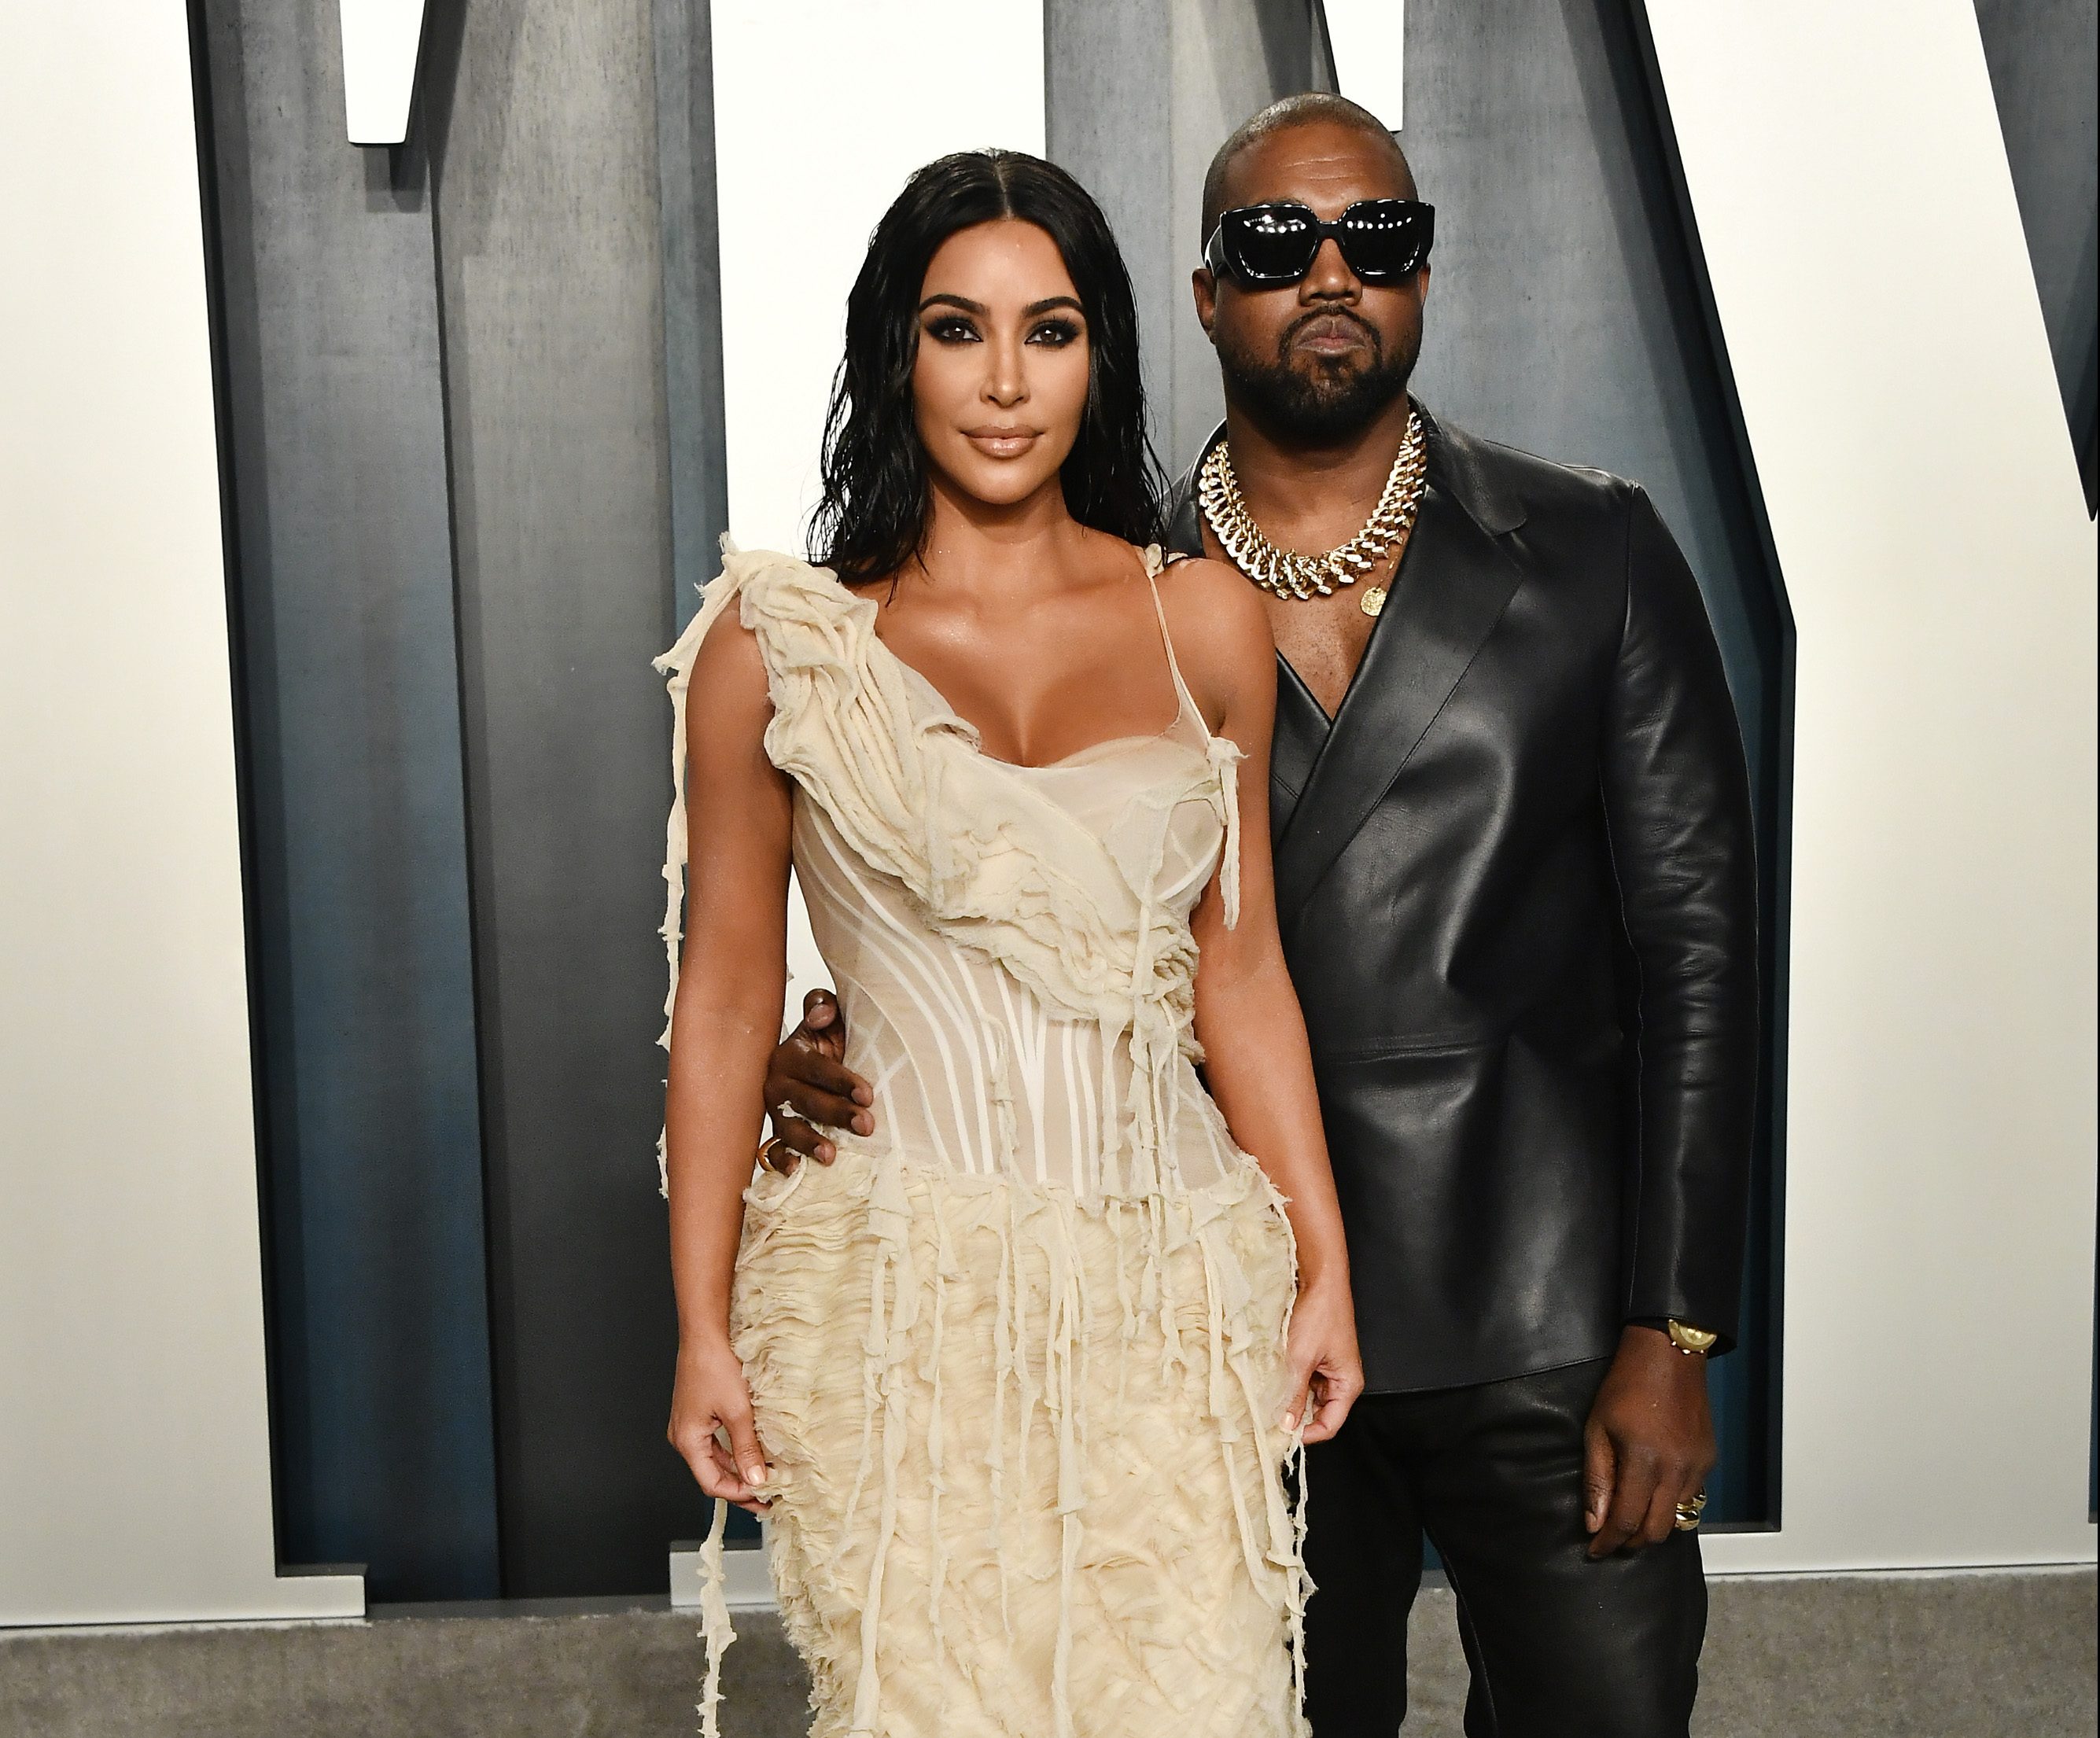 Kim Kardashian And Kanye West Are Now Officially Divorced The Fashion Vibes 